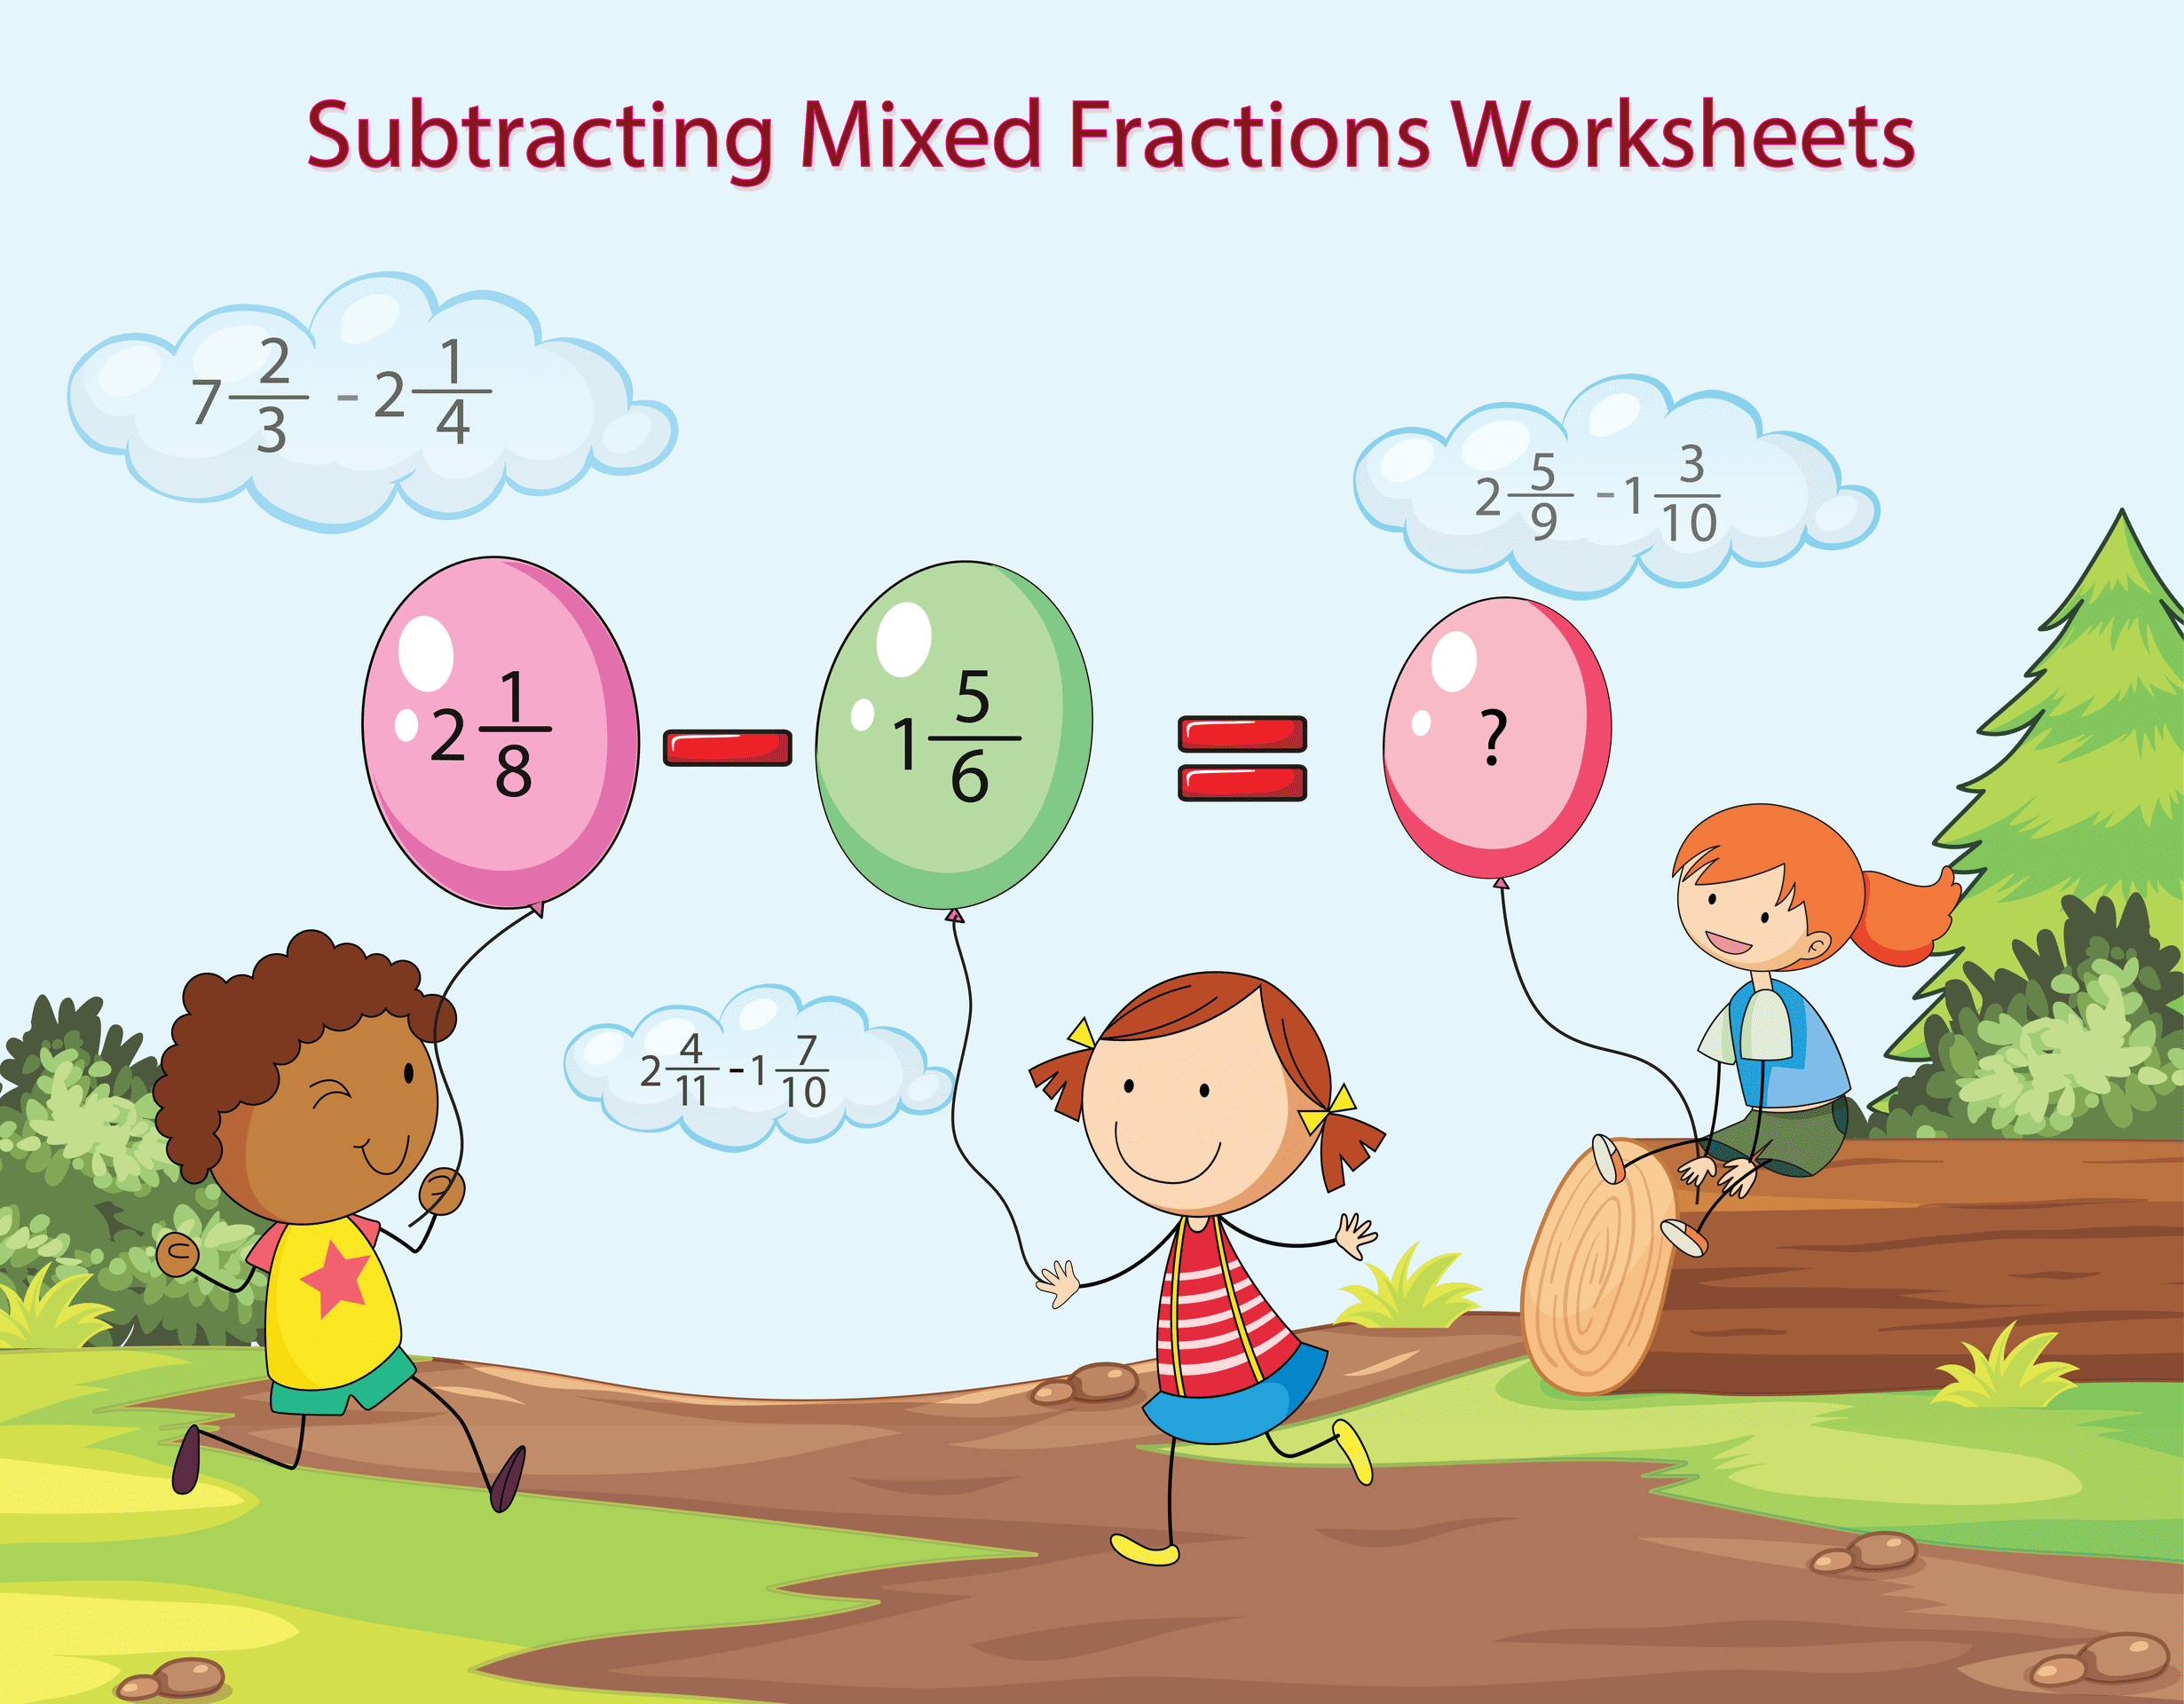 Subtracting Mixed Fractions Worksheets | Free Printables